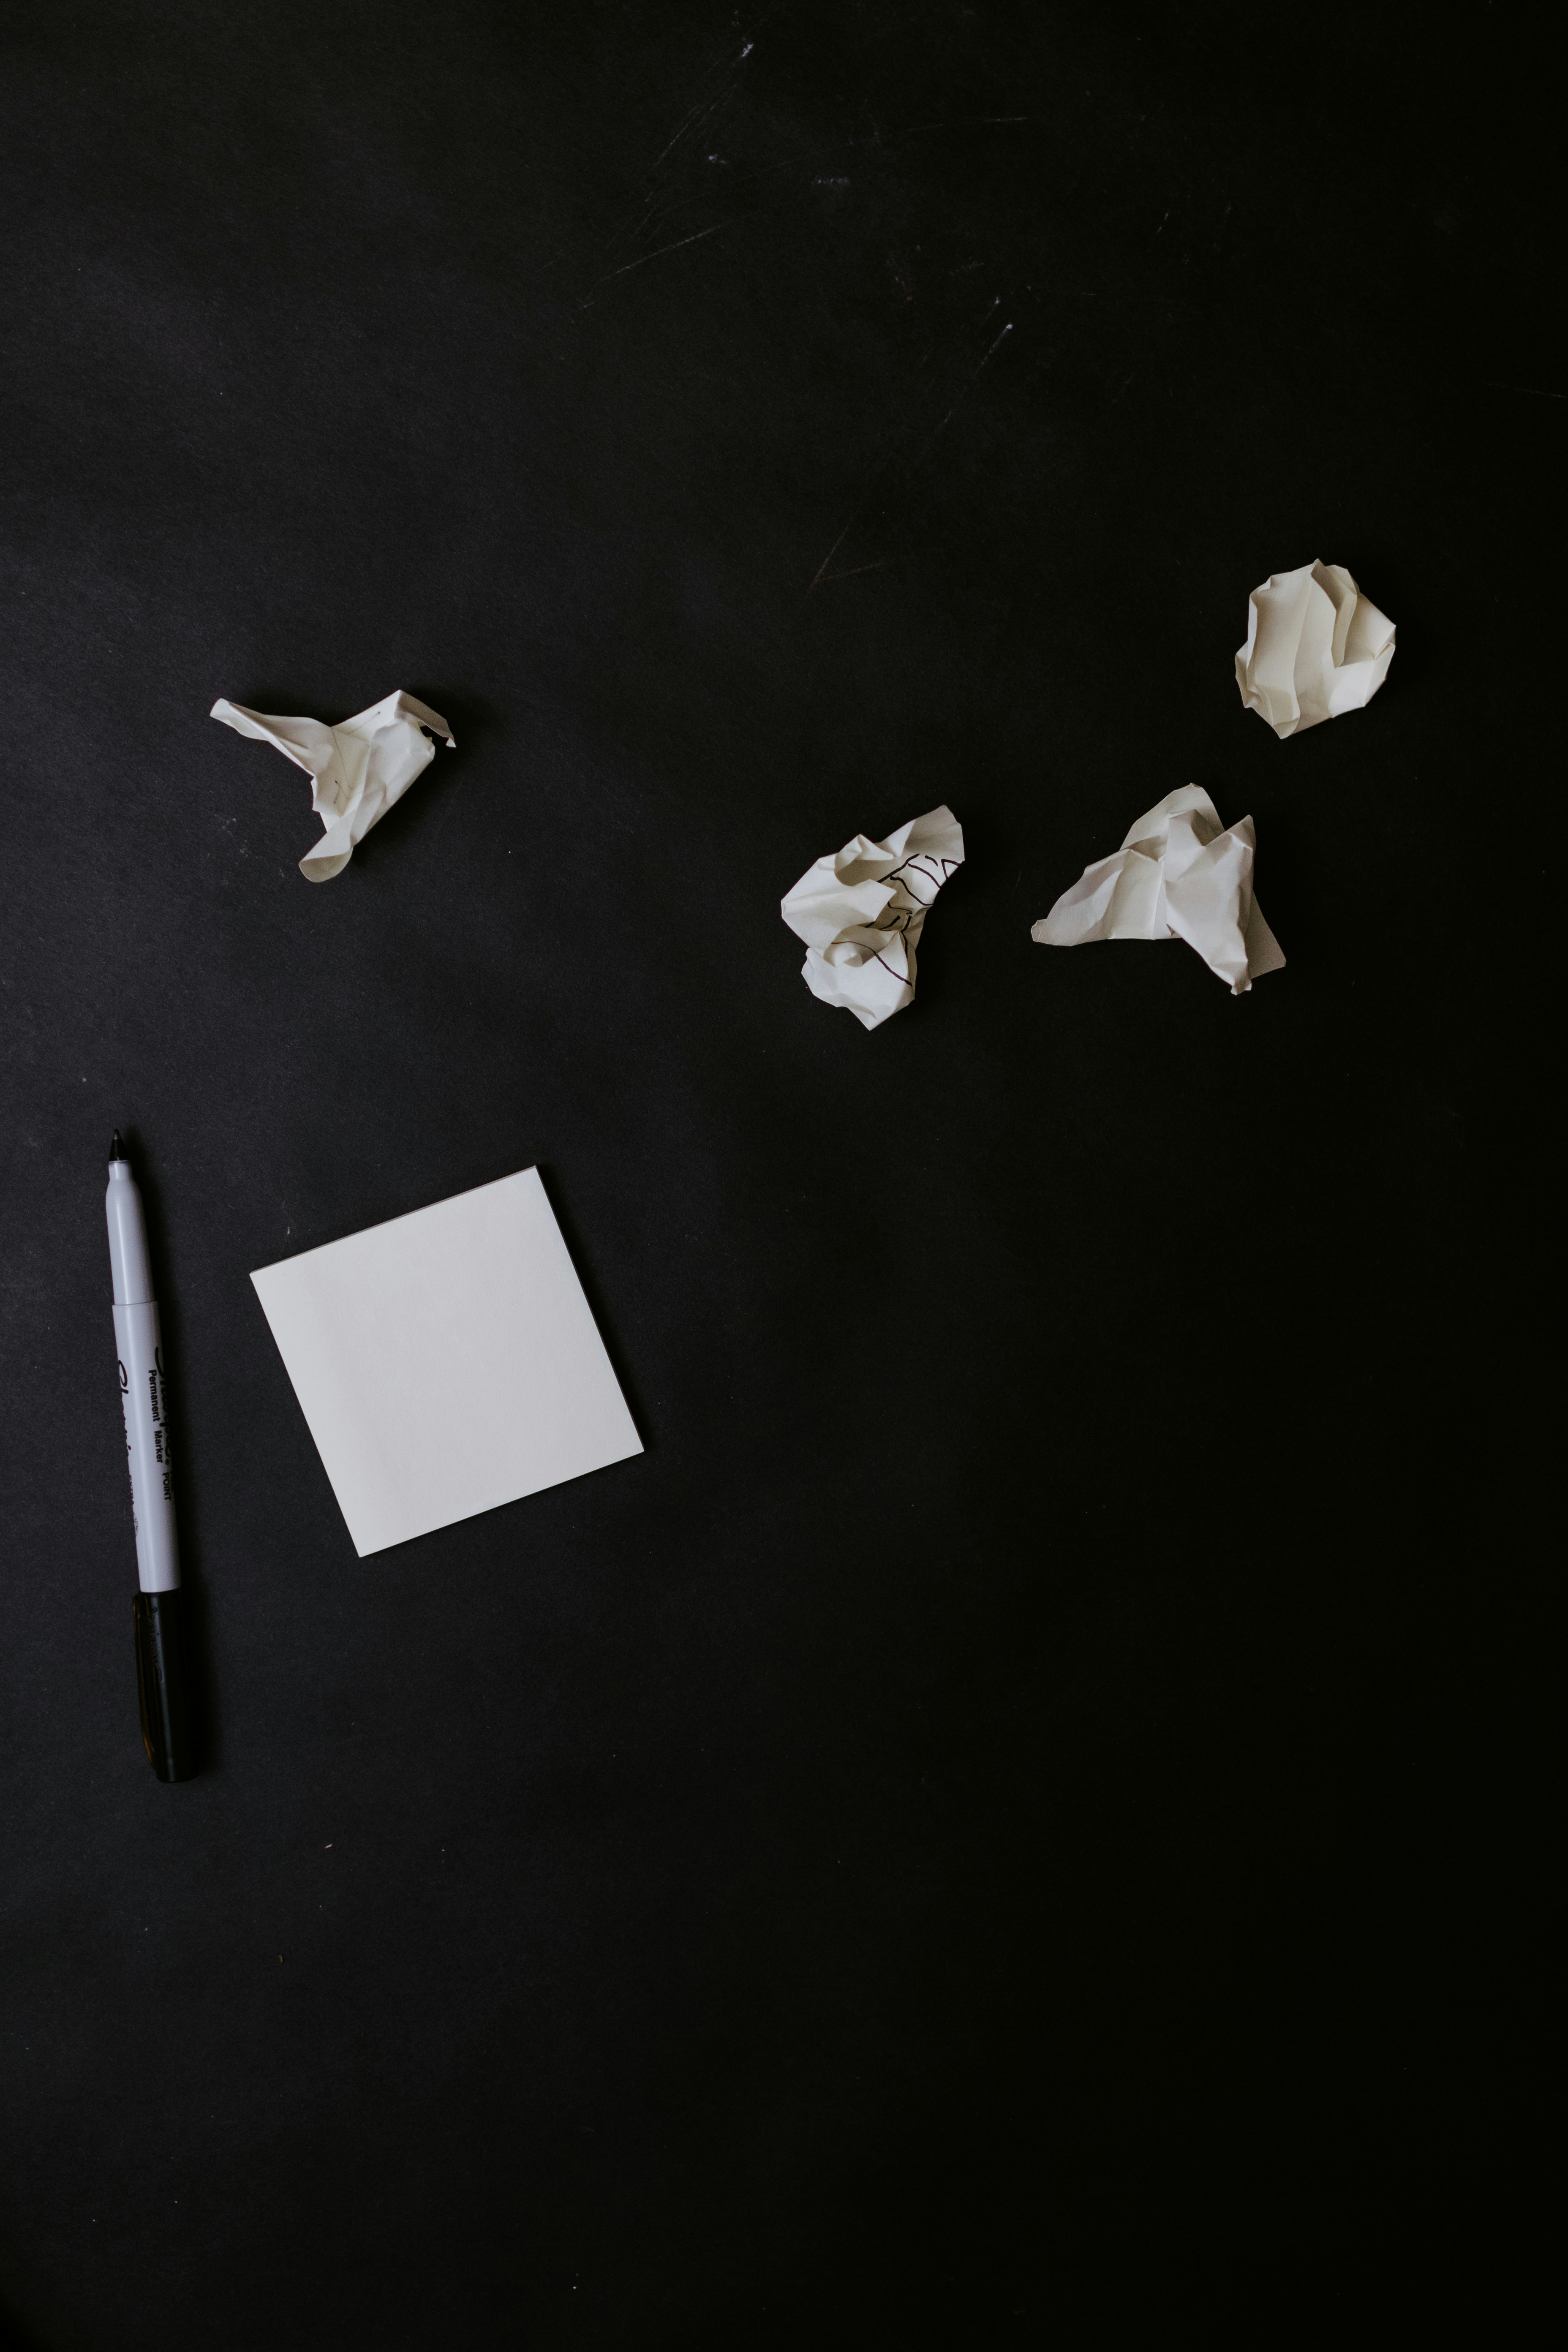 Image shows a black background with white post it nores and a black and white pen. There are crumpled bits of paper above that.